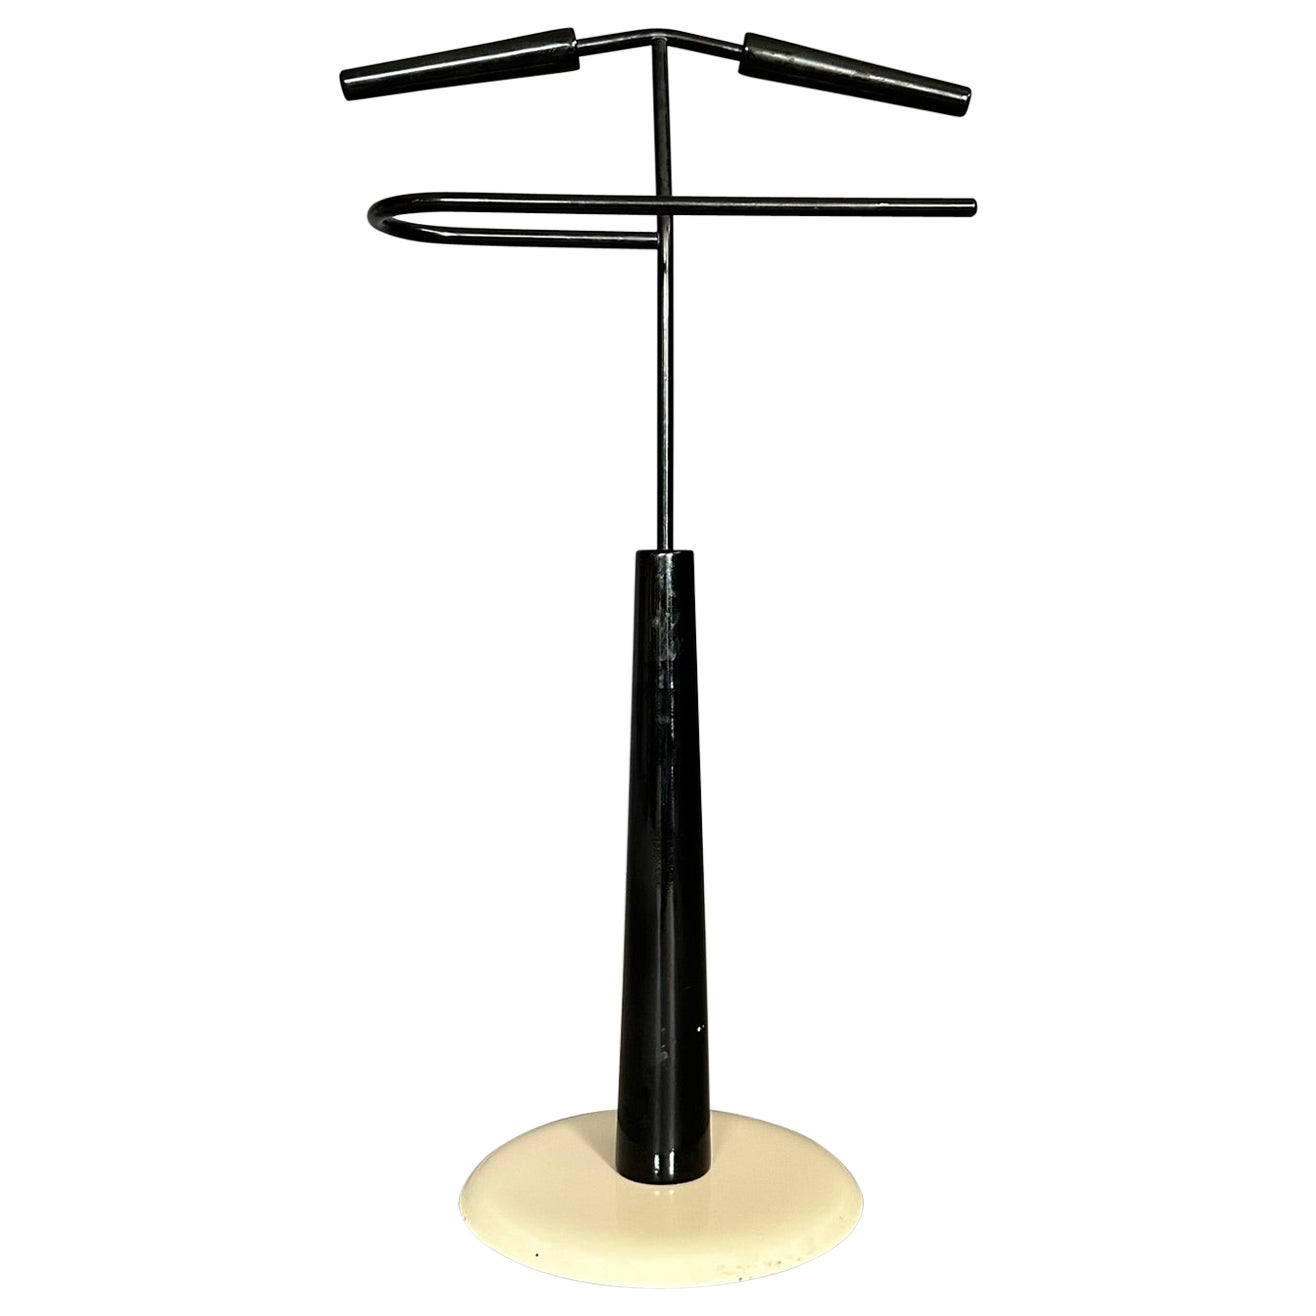 Valet stand, 1980s, Italian manufacture, in black wood and cream metal base